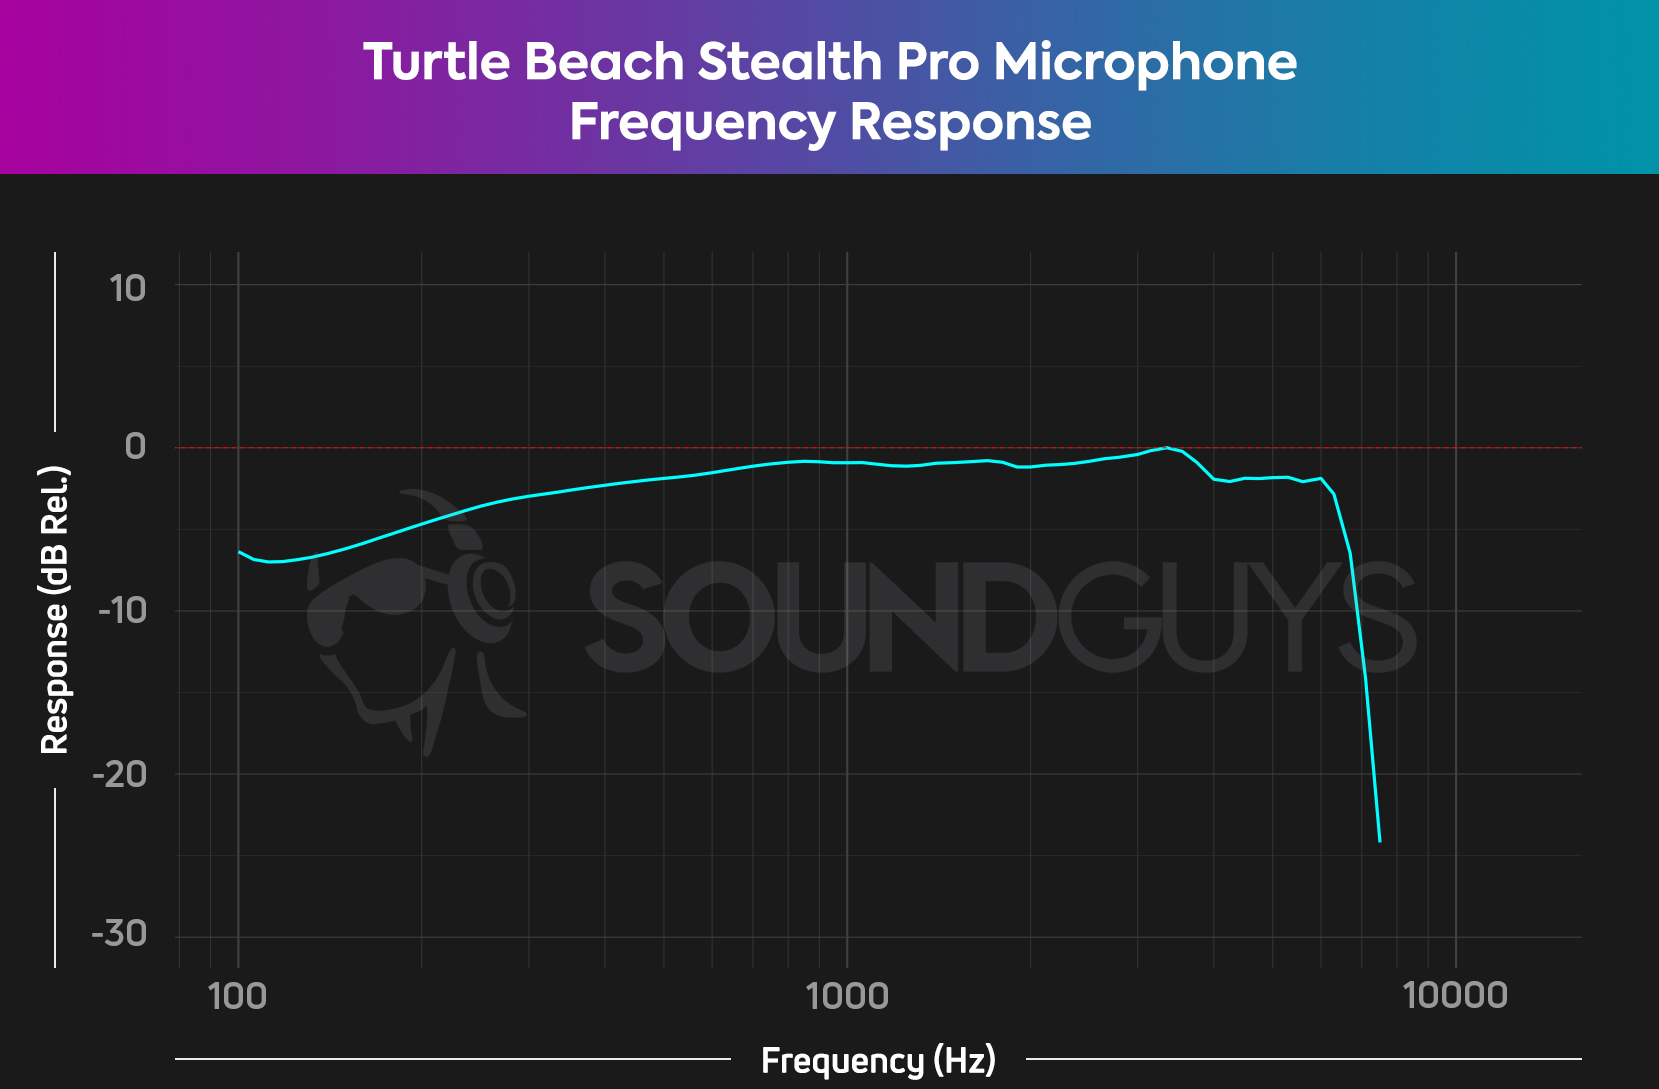 A frequency response chart for the Turtle Beach Stealth Pro gaming headset microphone, which shows a decent level of low end emphasis.